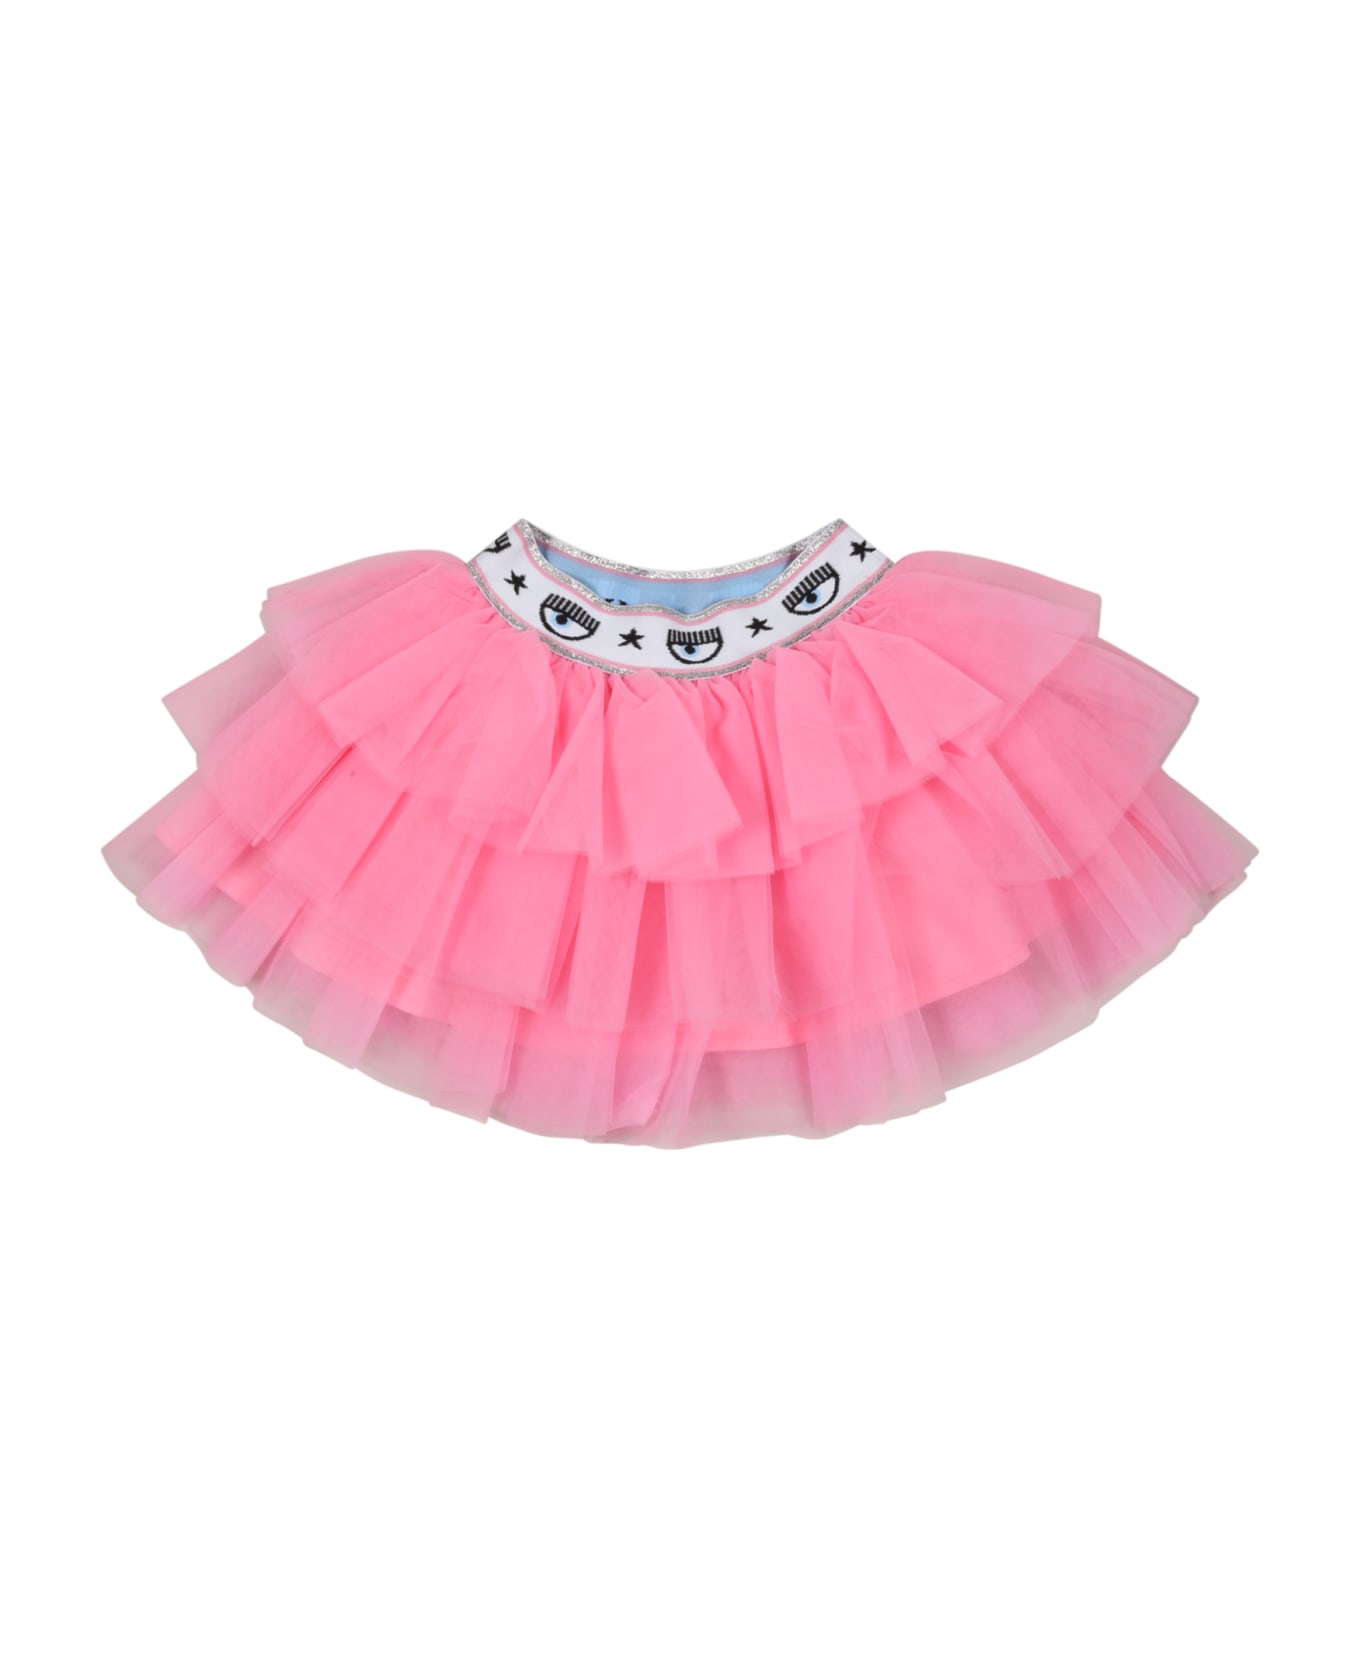 Chiara Ferragni Pink Skirt For Baby Girl With Winks - Pink